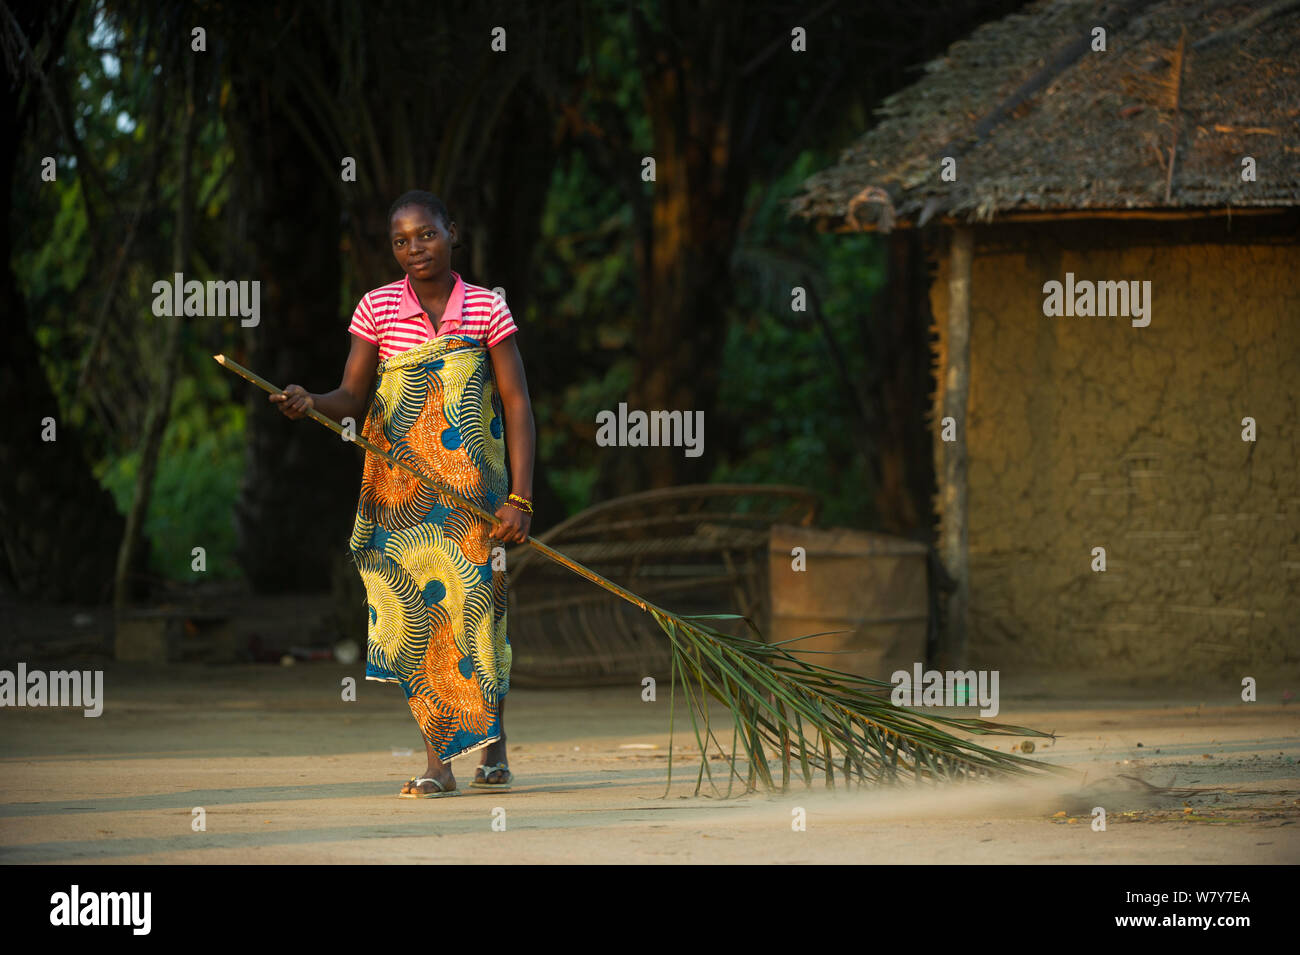 Woman sweeping with palm leaf, Republic of Congo (Congo-Brazzaville), Africa, June 2013. Stock Photo